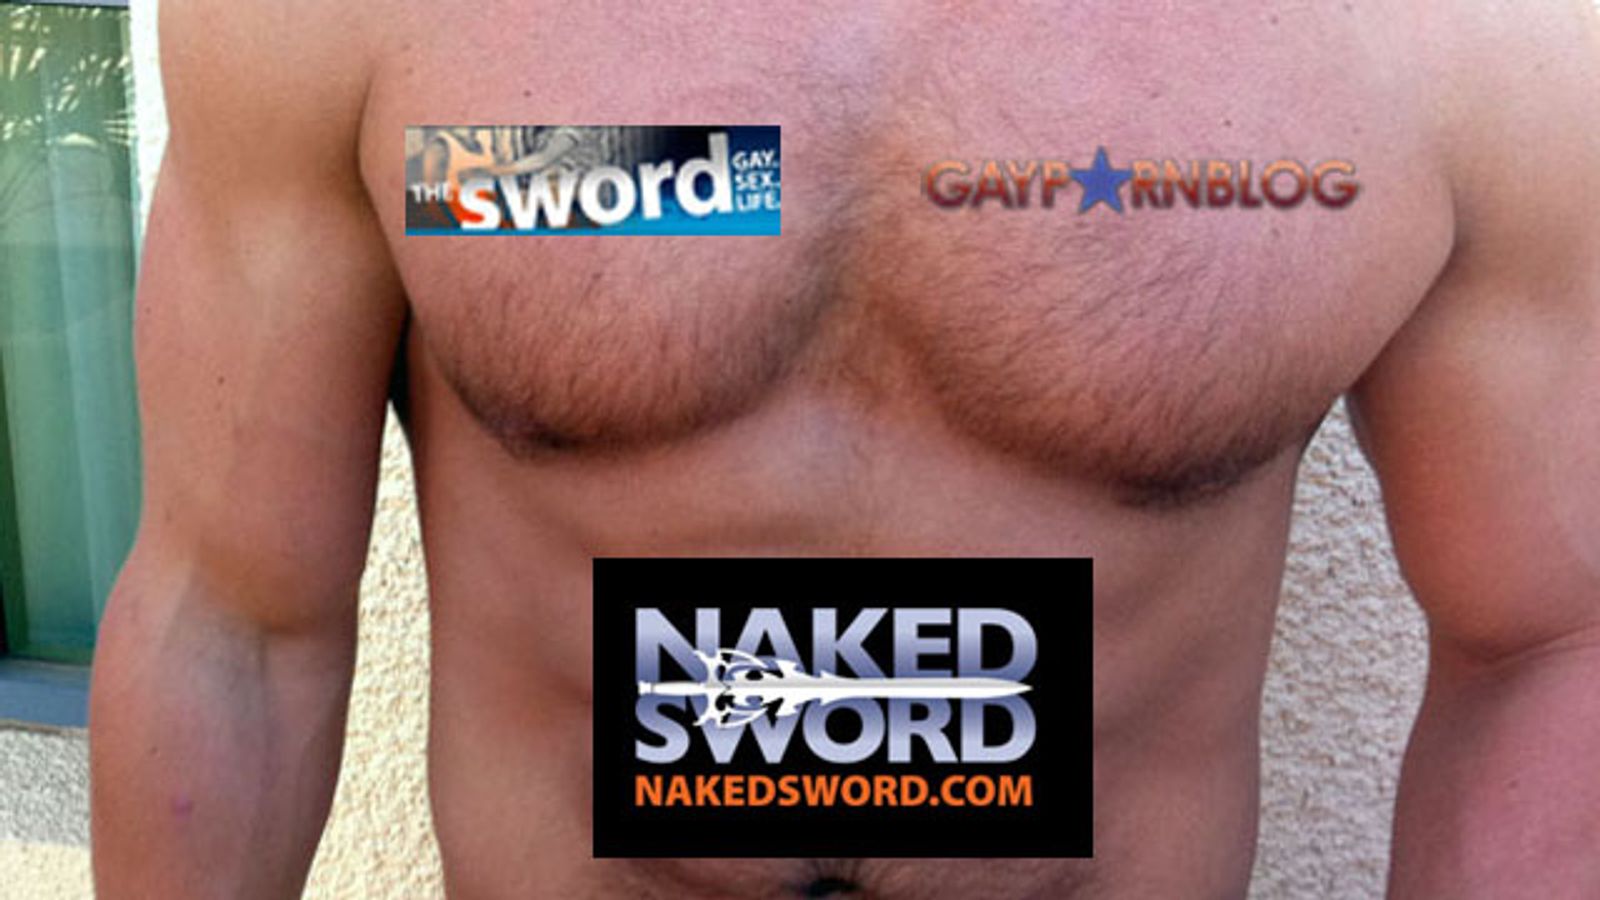 NakedSword’s Gay Porn Blog and the Sword Re-Launch, Reload